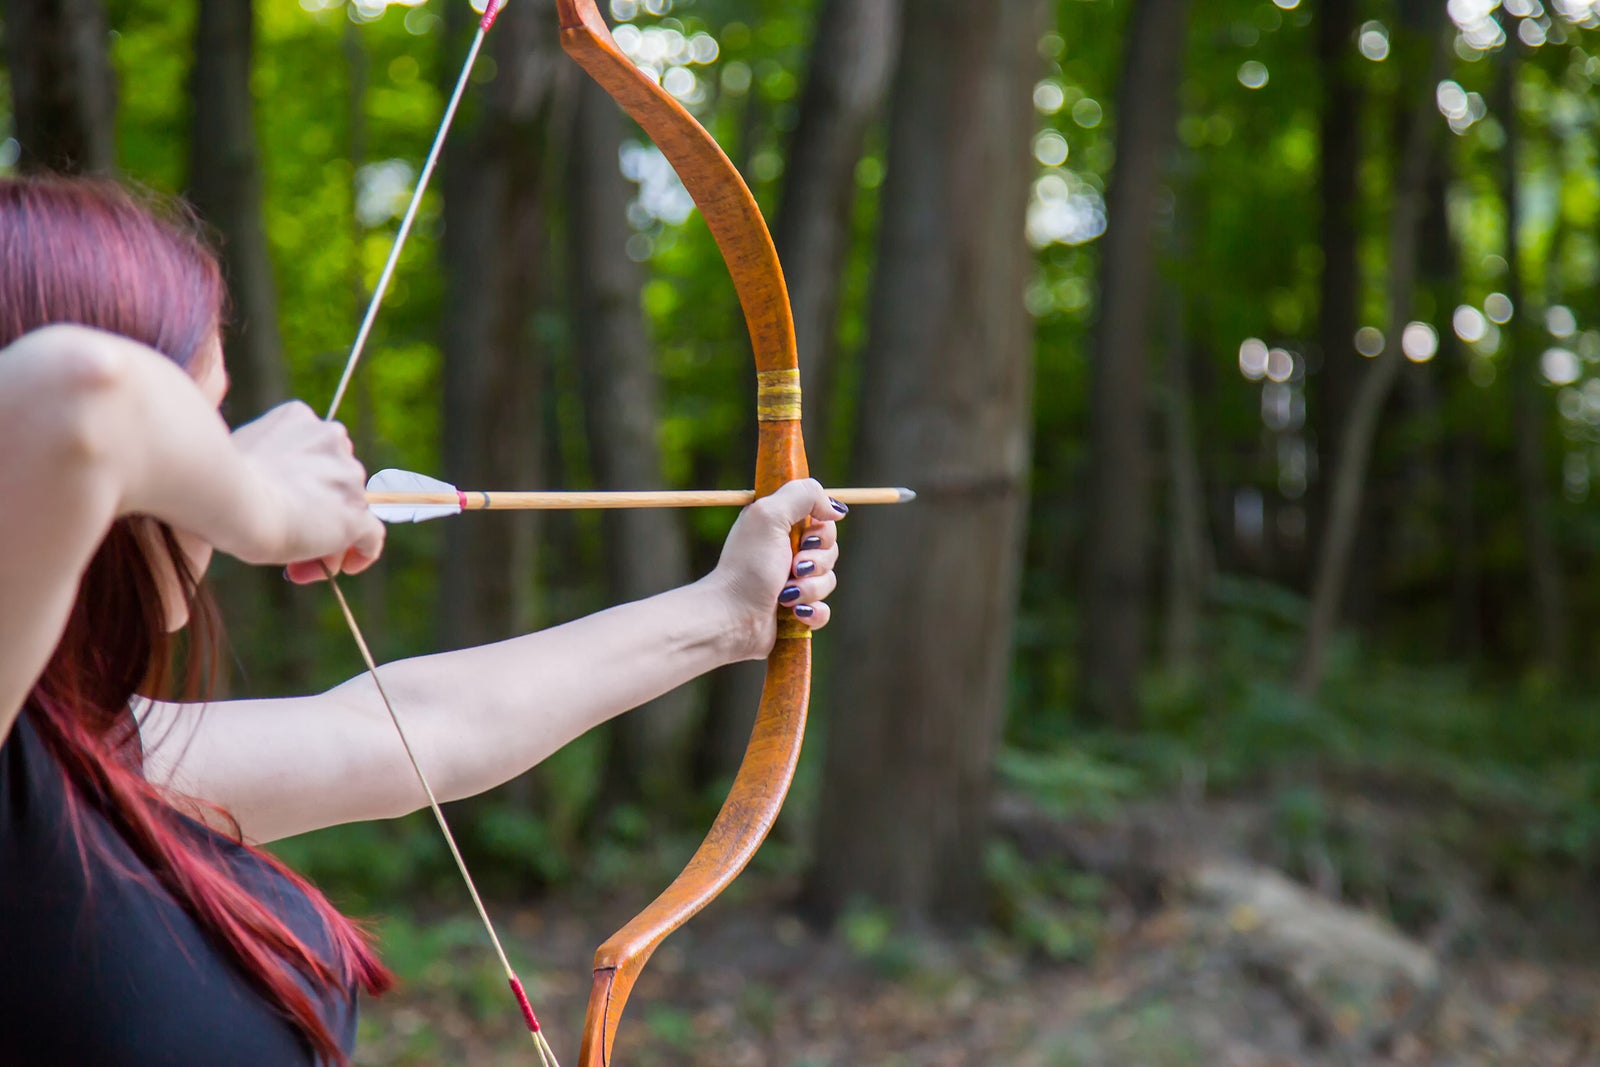 Woman archer shooting targets with wooden bow at historical festival. Archery and medieval culture concept